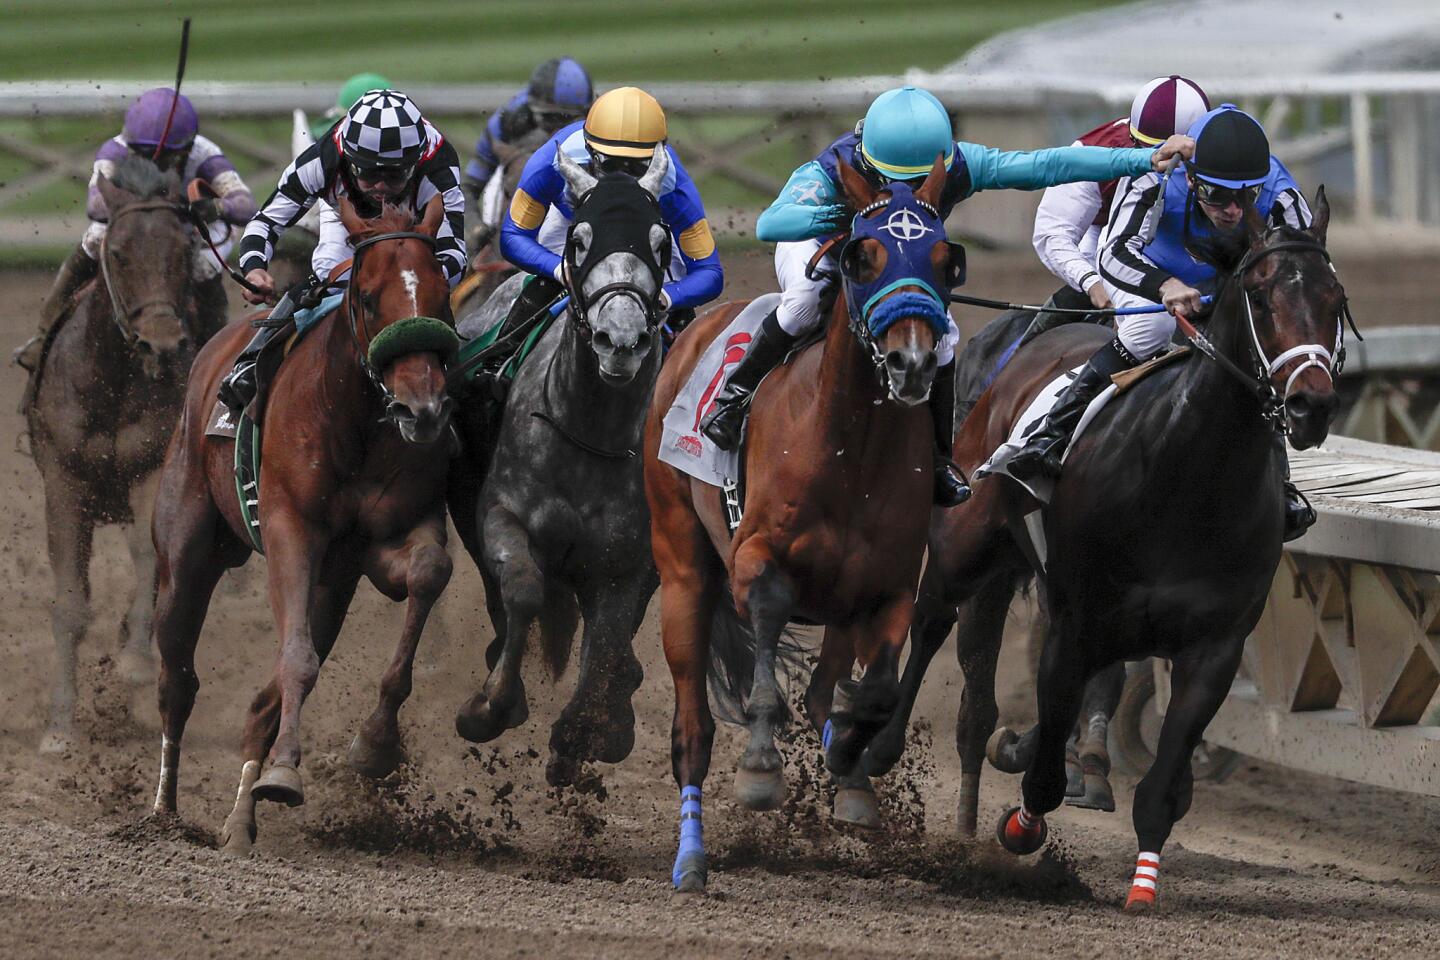 Appreciated, ridden by jockey Aaron Gruyder, heads into the final stretch, neck-and-neck with Bob’s Sniper and jockey Brice Blanc in the first race at Santa Anita Park. Appreciated finished second to Sir Eddie ridden by jockey Flavien Prat (gold helmet).